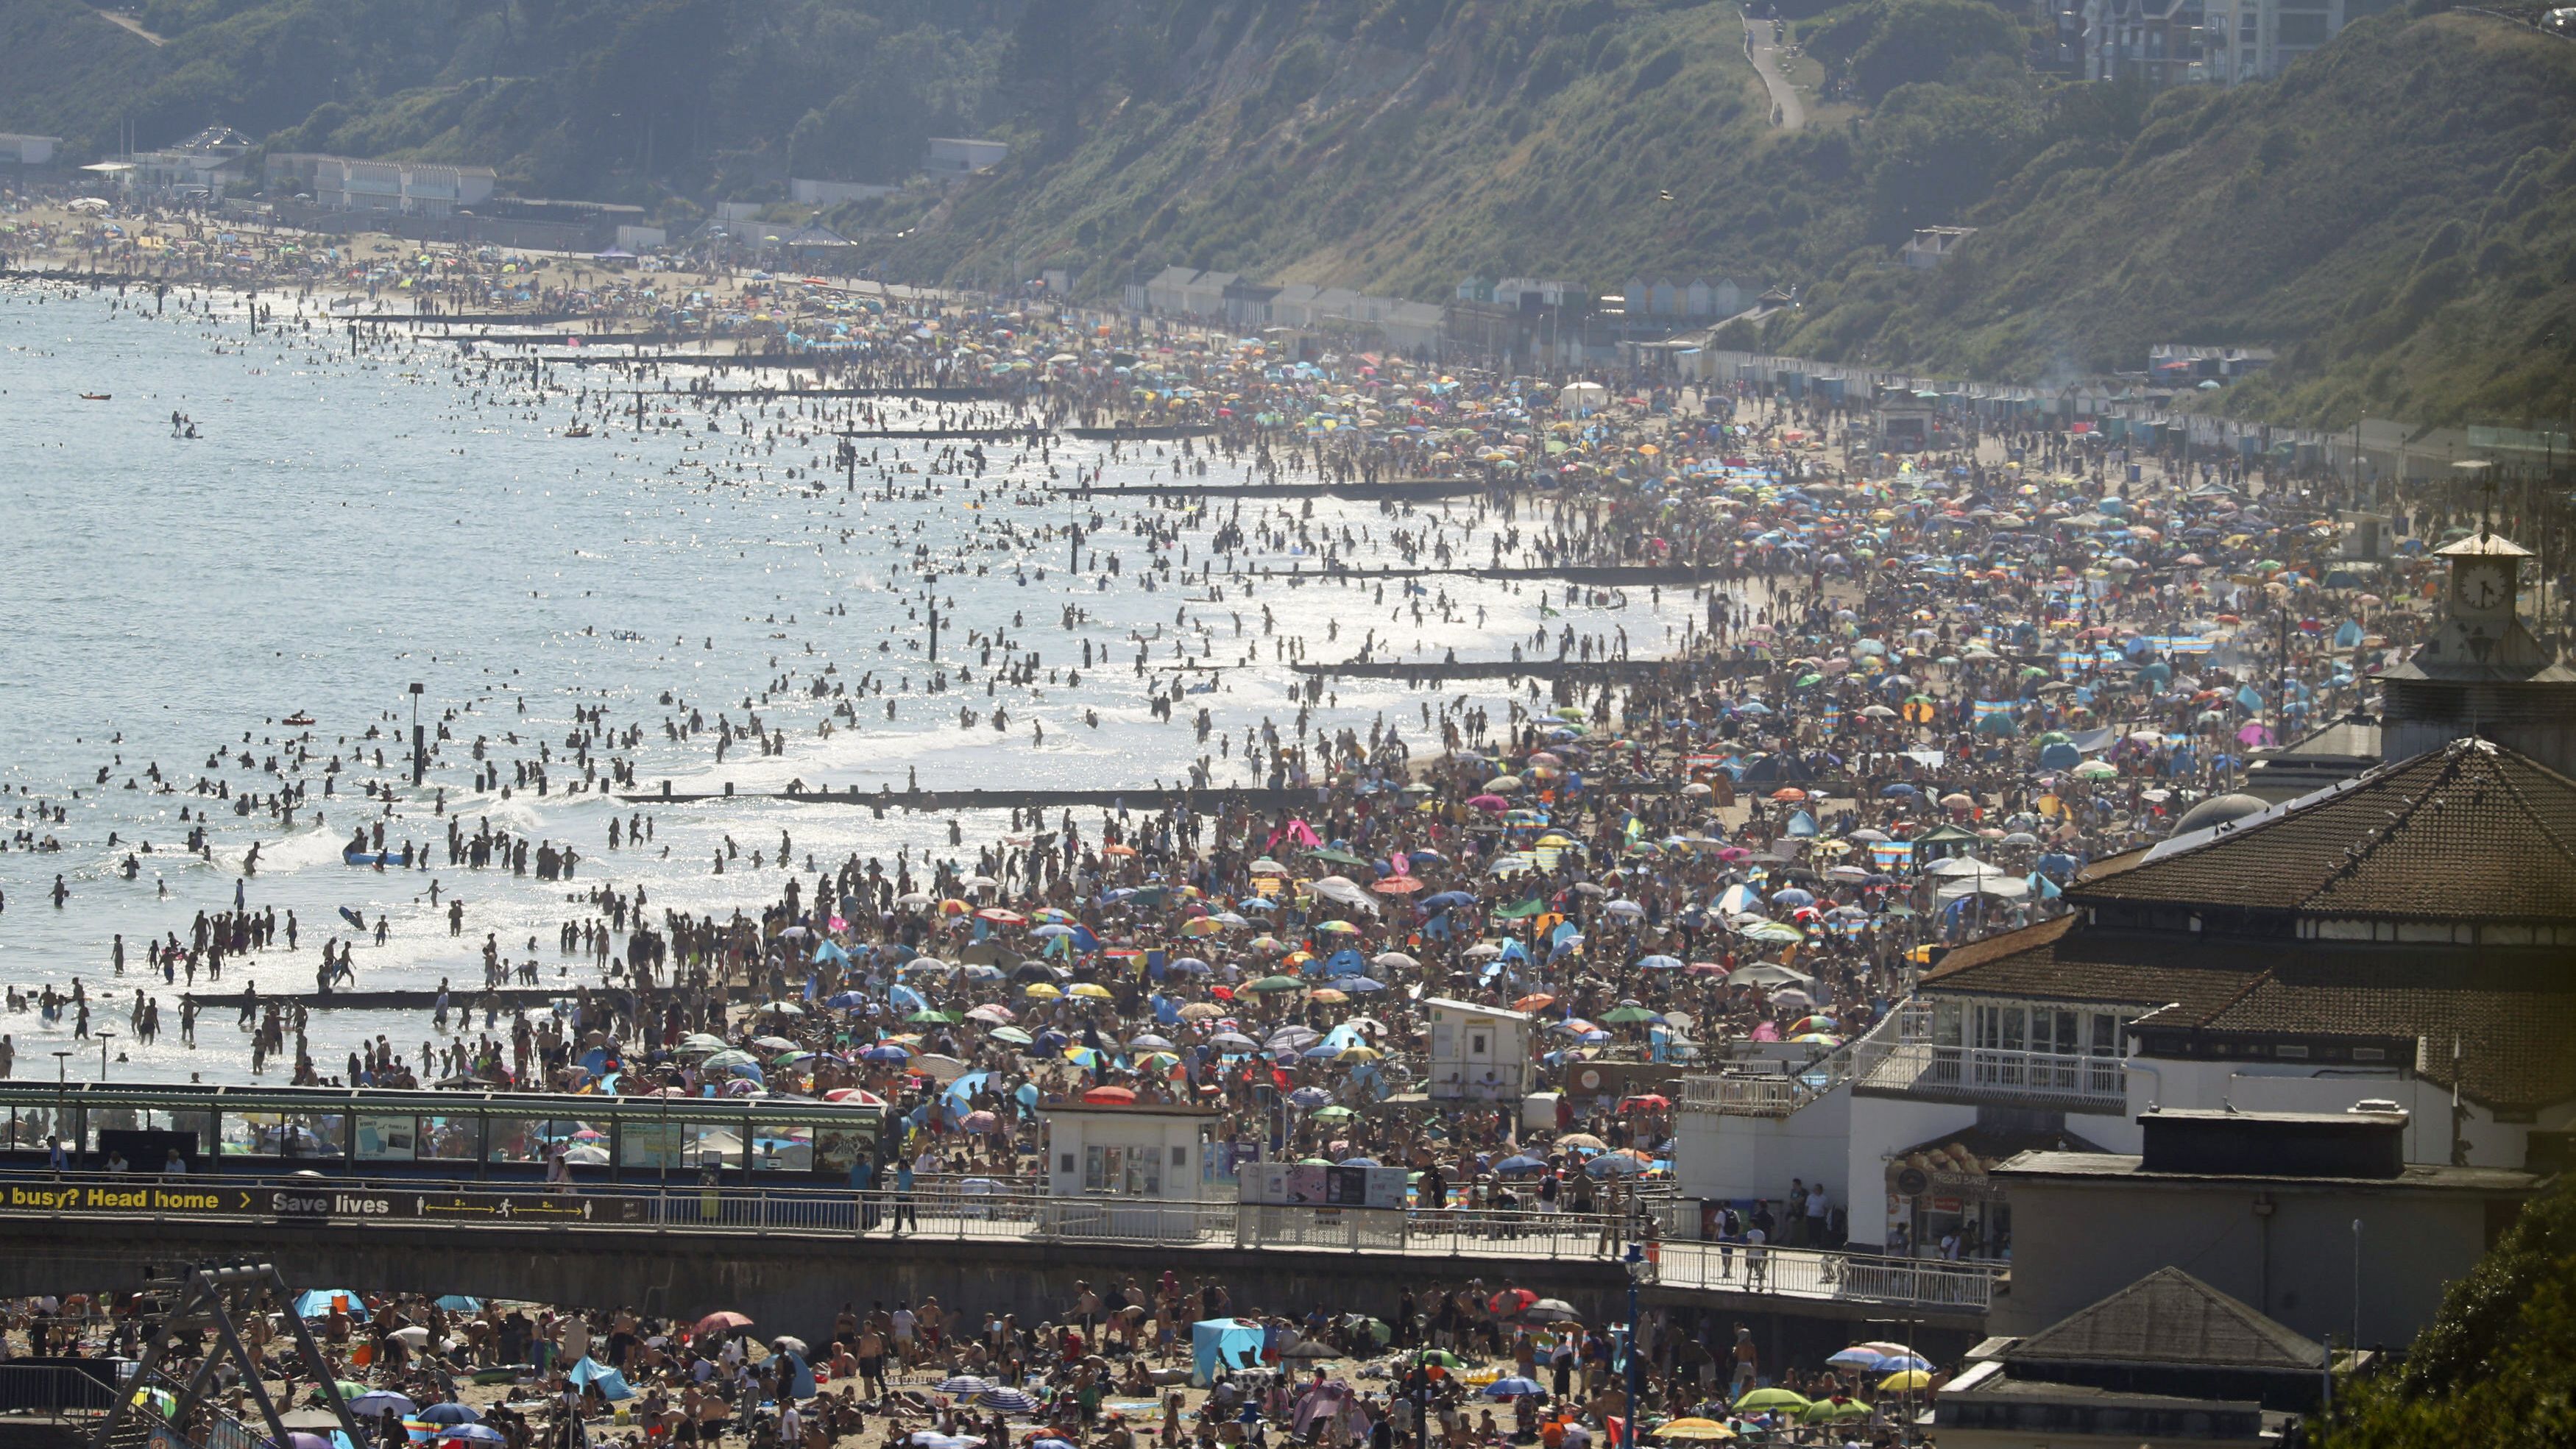 A beach is slammed with people in Bournemouth, England, on June 24. British Prime Minister Boris Johnson <a href="https://www.cnn.com/2020/05/10/uk/uk-coronavirus-lockdown-boris-johnson-gbr-intl/index.html" target="_blank">began easing coronavirus restrictions in May,</a> but people are still supposed to be distancing themselves from one another.